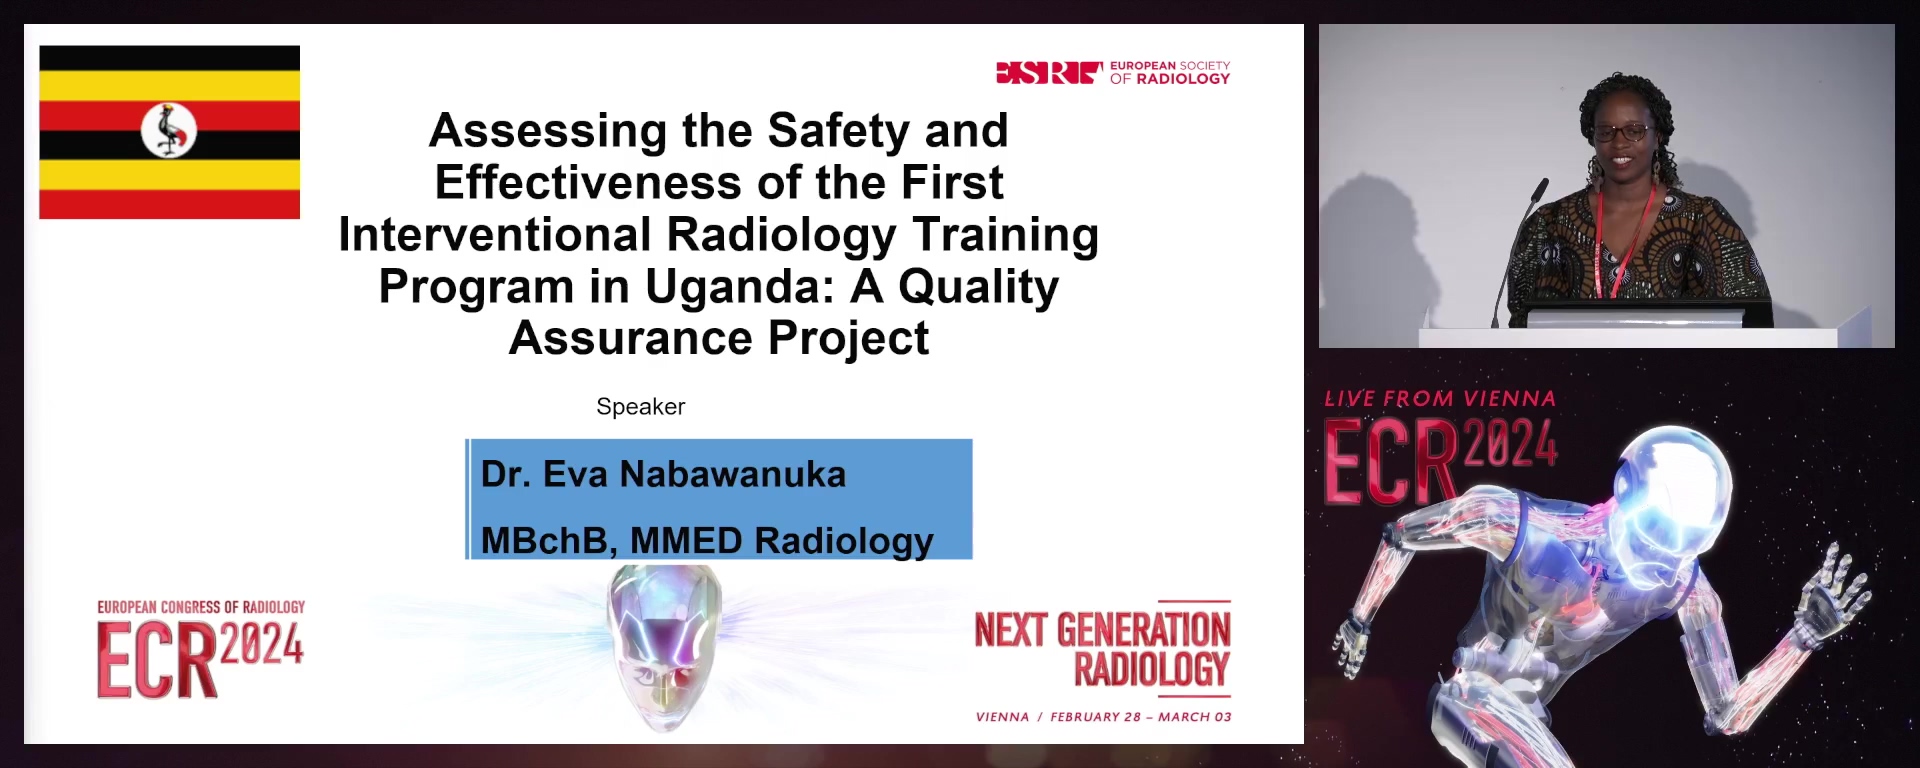 Assessing the Safety and Effectiveness of the First Interventional Radiology Training Program in Uganda: A Quality Assurance Project